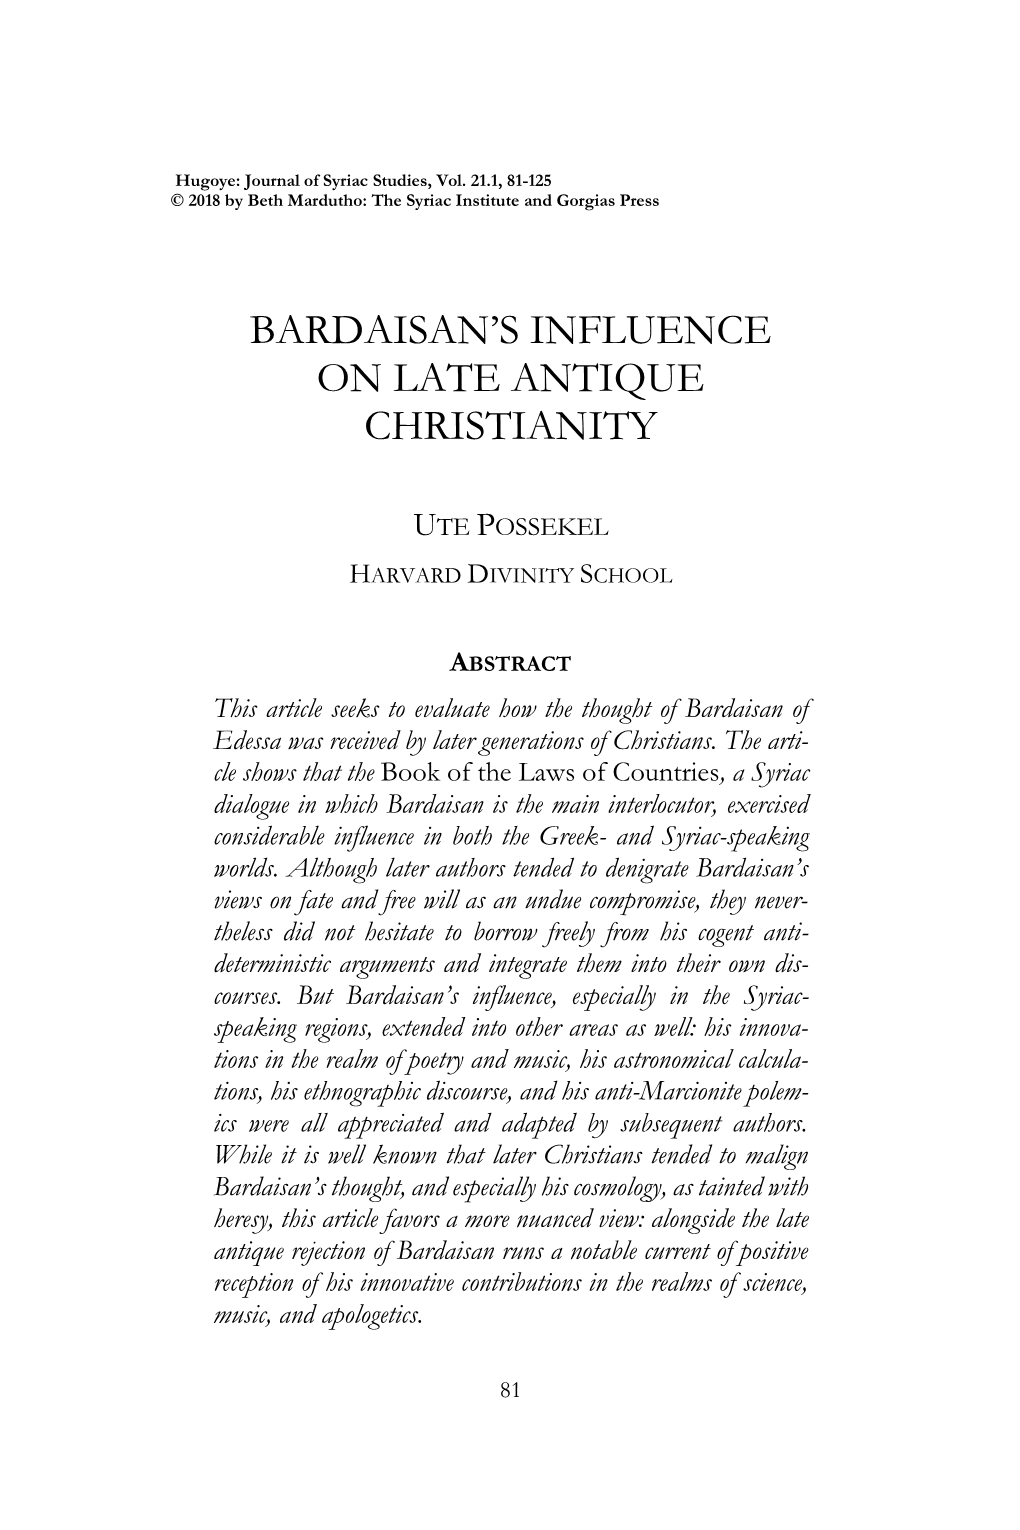 Bardaisan's Influence on Late Antique Christianity